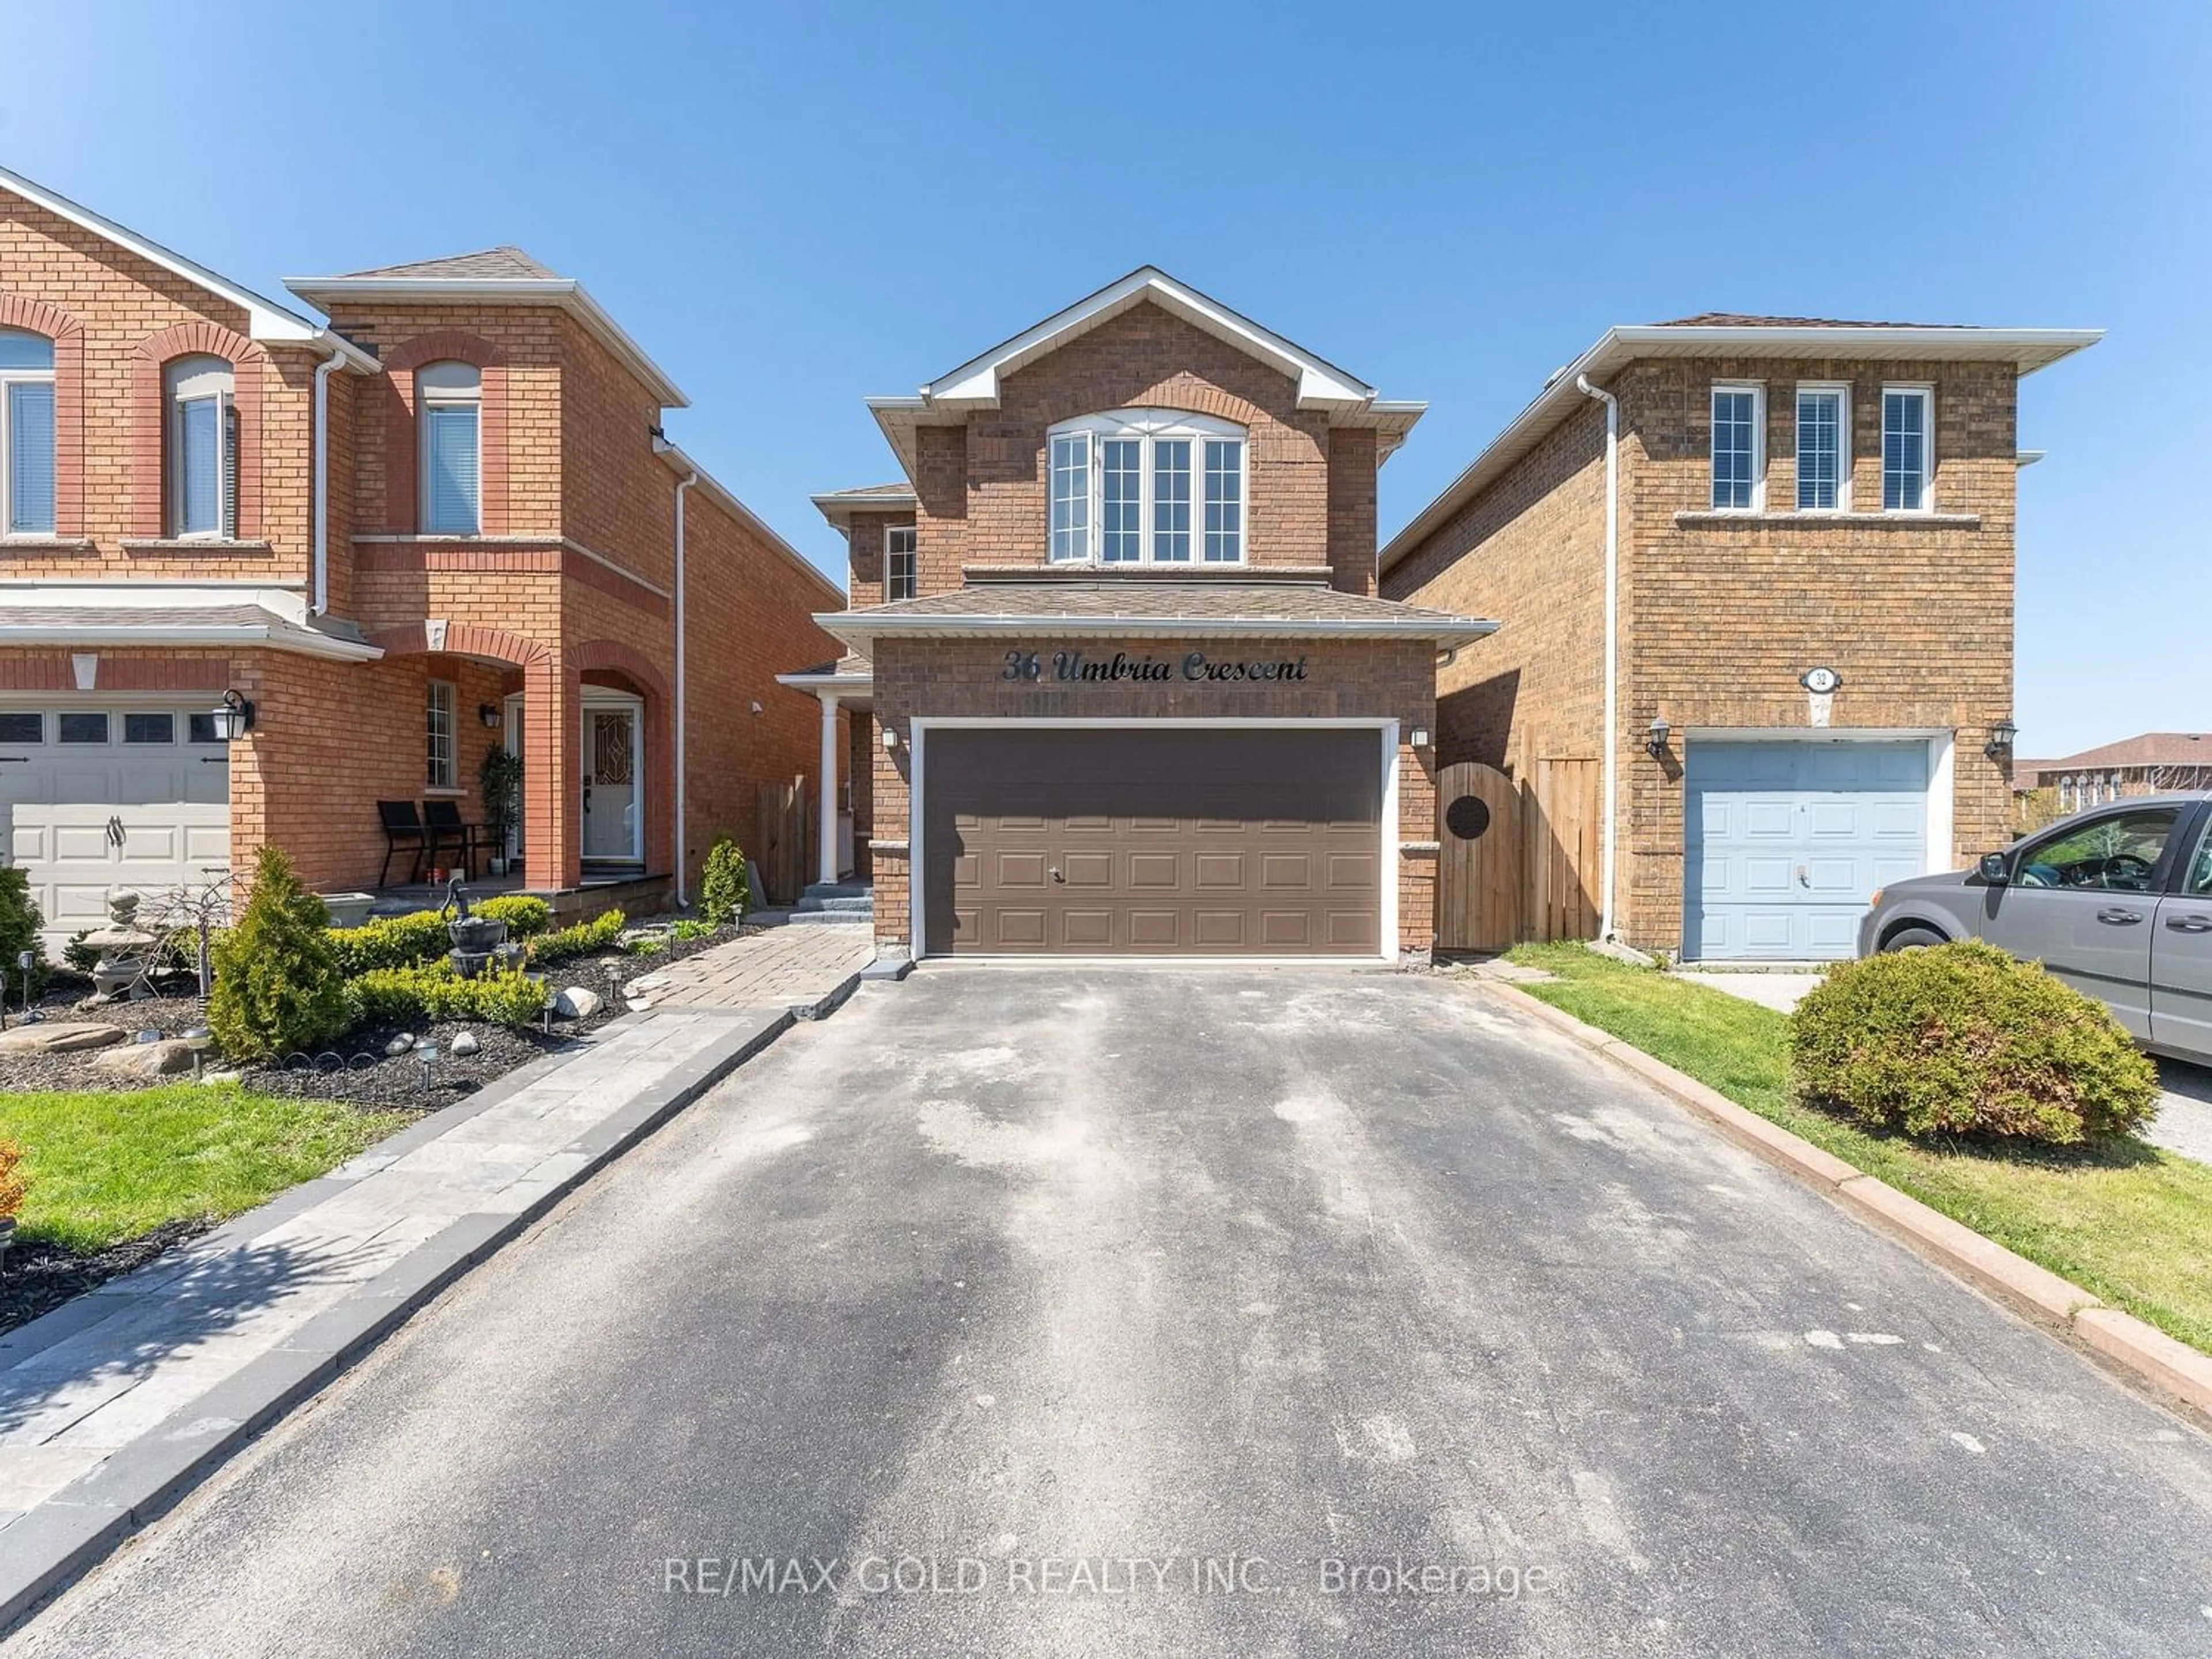 Frontside or backside of a home for 36 Umbria Cres, Vaughan Ontario L4H 2E1